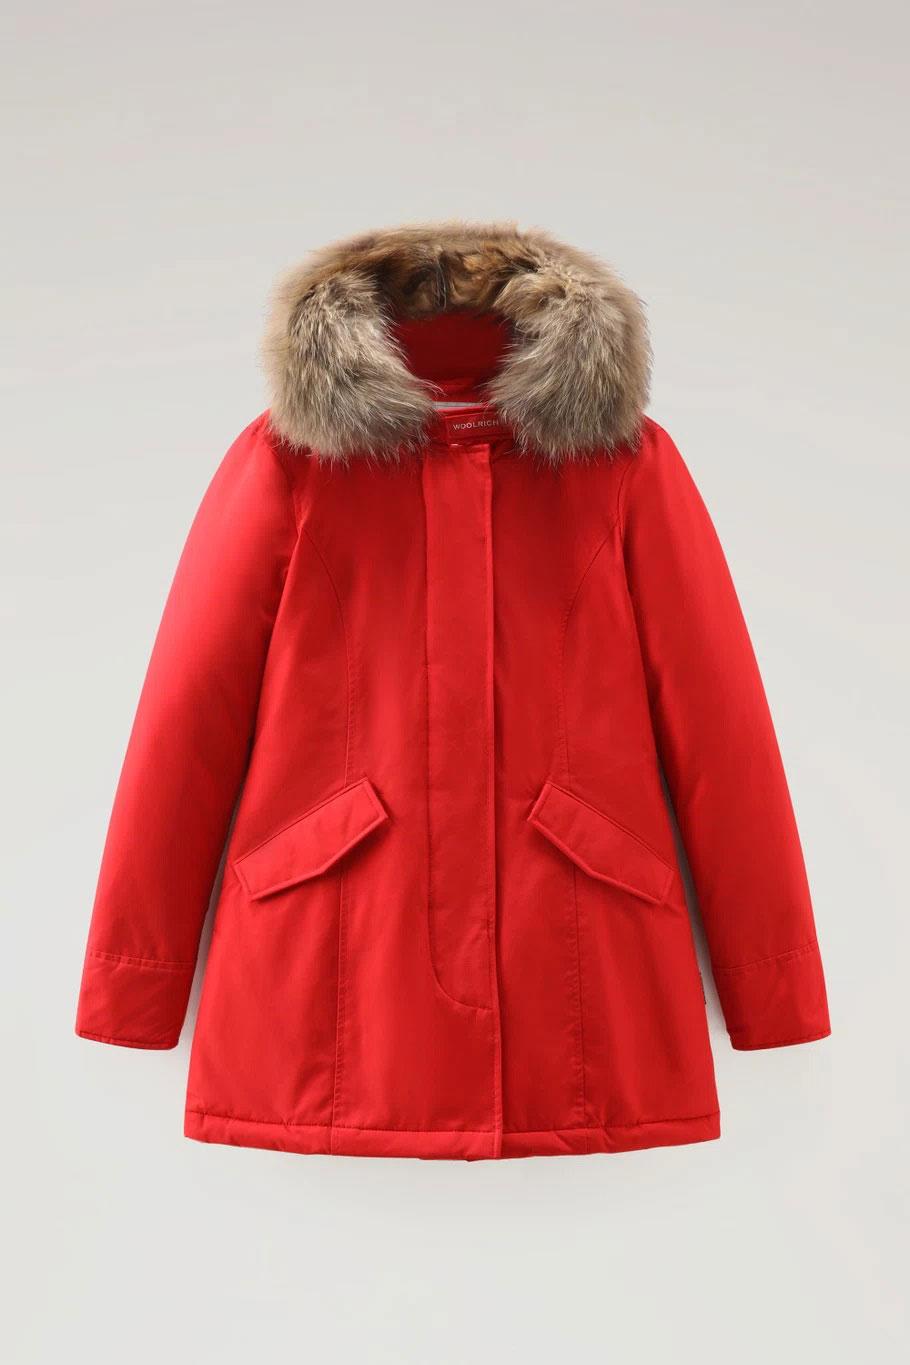 Giaccone Woolrich Artic Racoon Parka Marine Scarlet